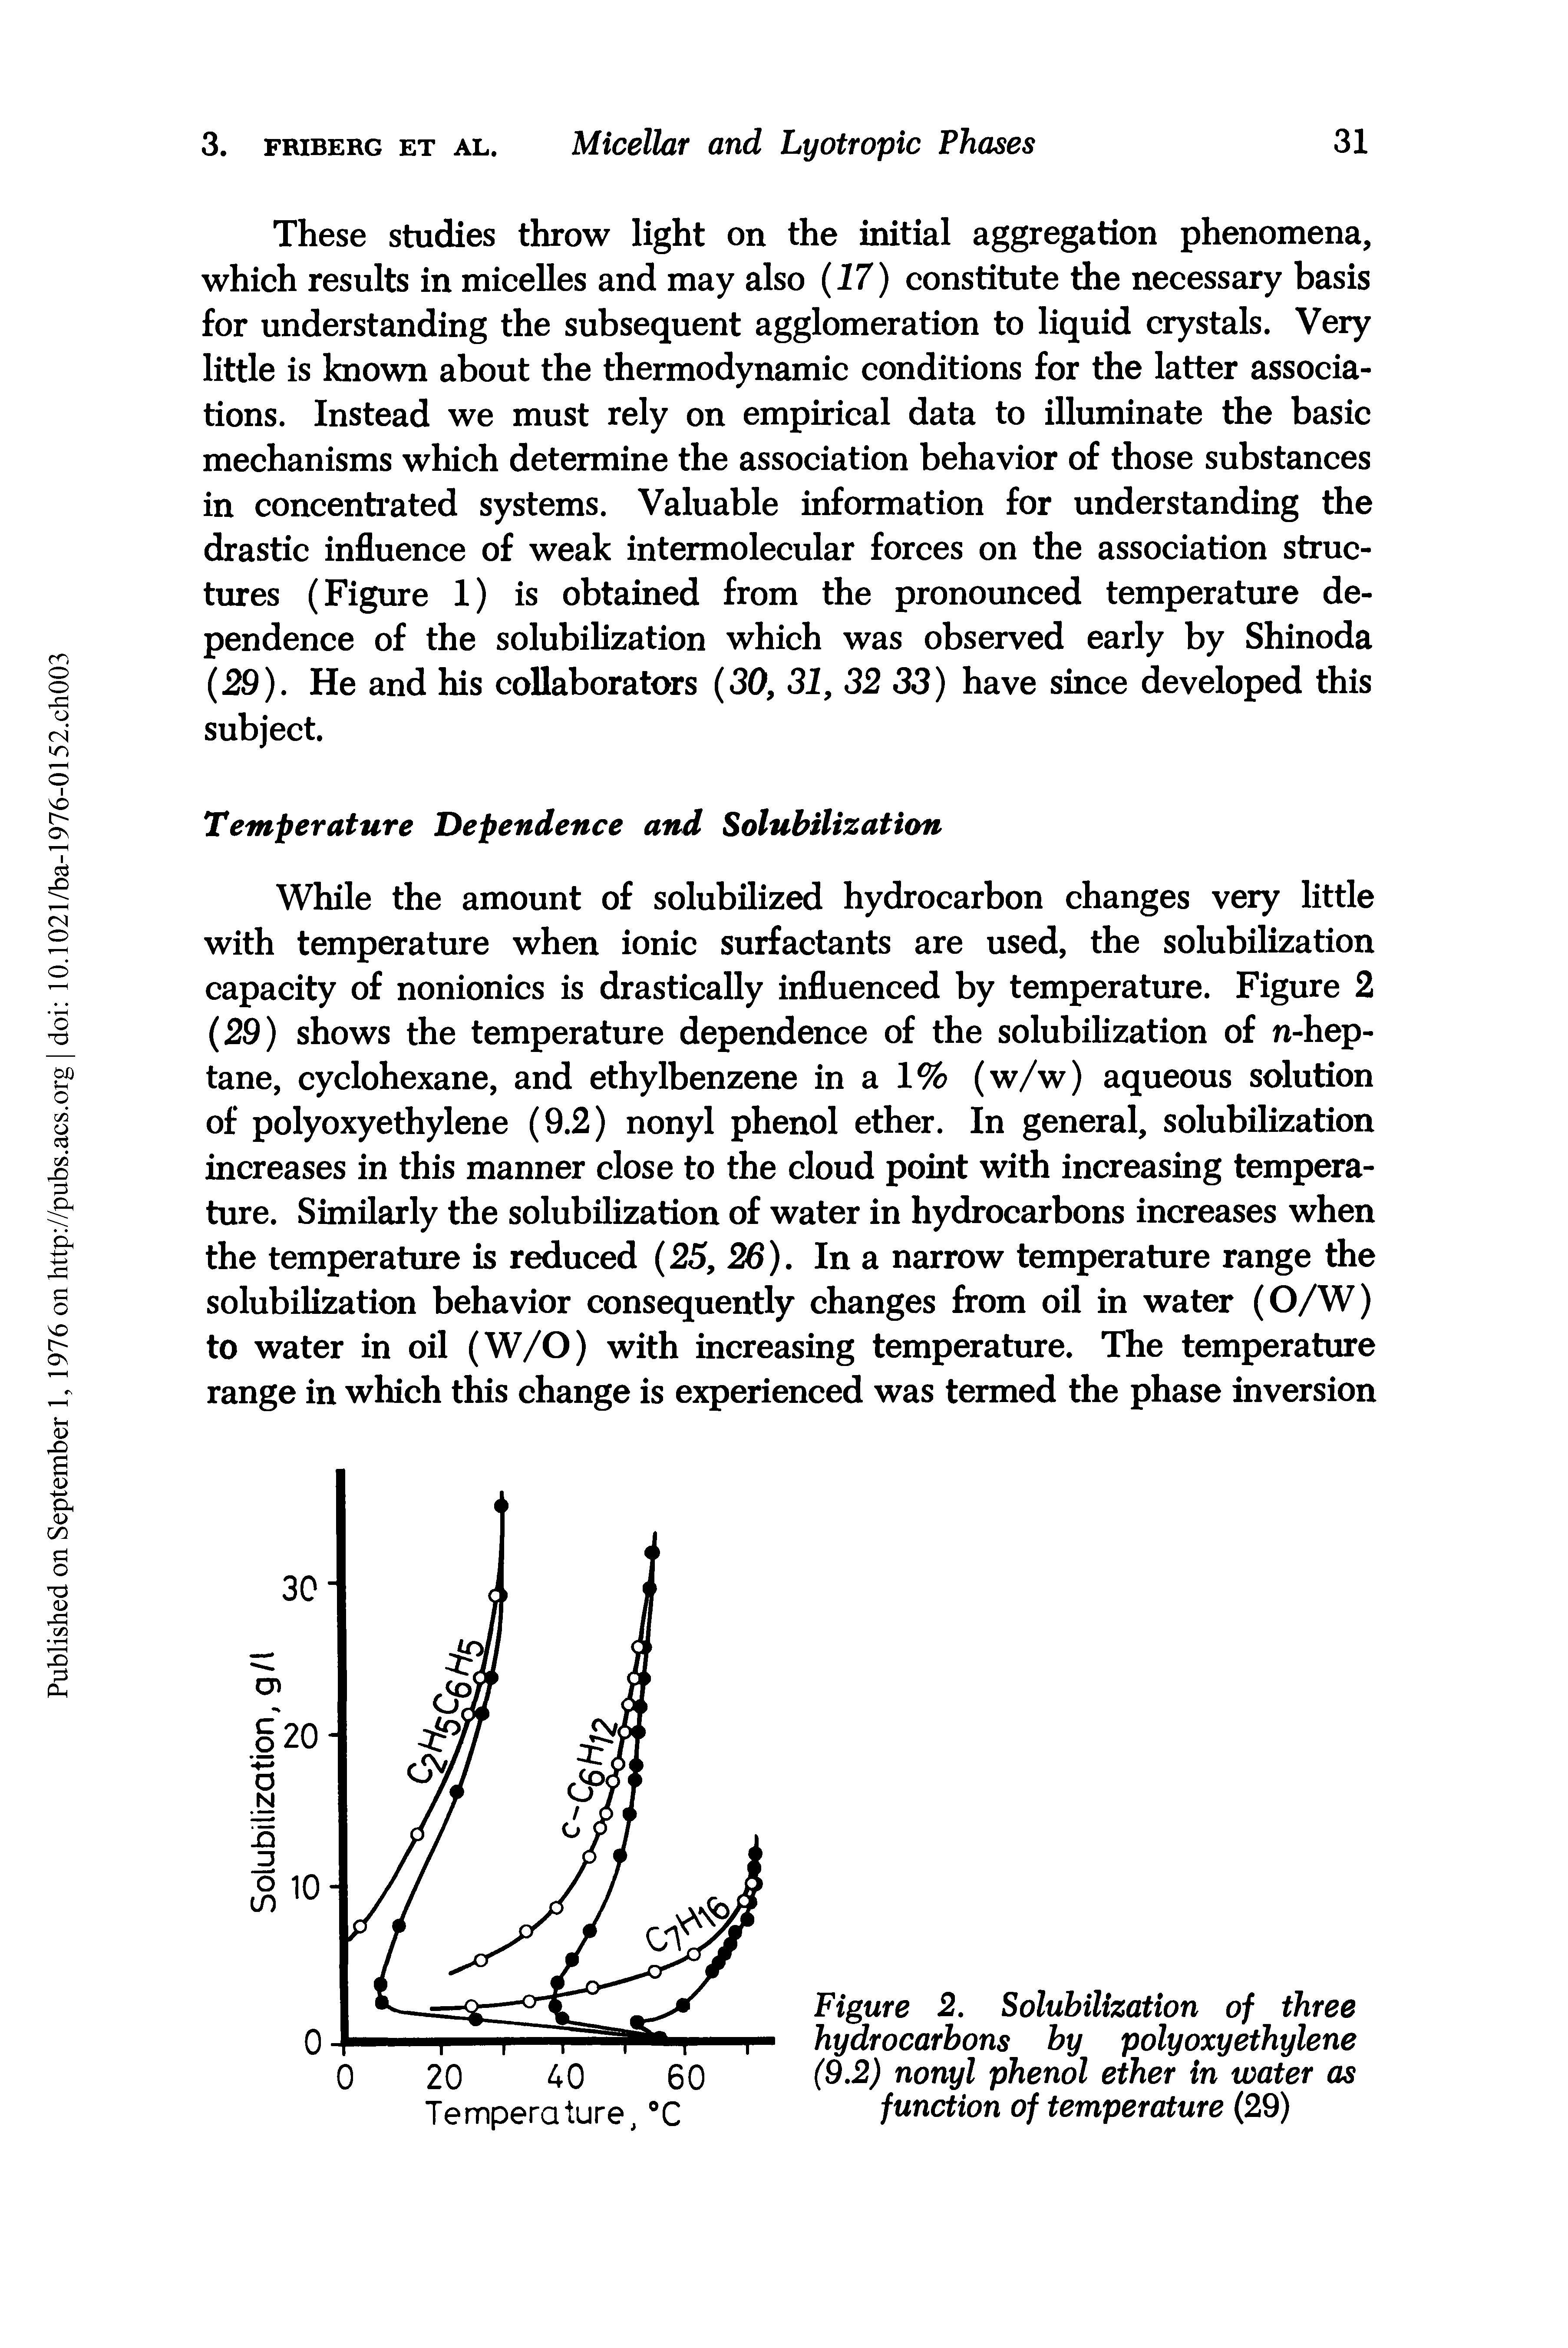 Figure 2. Solubilization of three hydrocarbons by polyoxyethylene (9.2) nonyl phenol ether in water as function of temperature (29)...